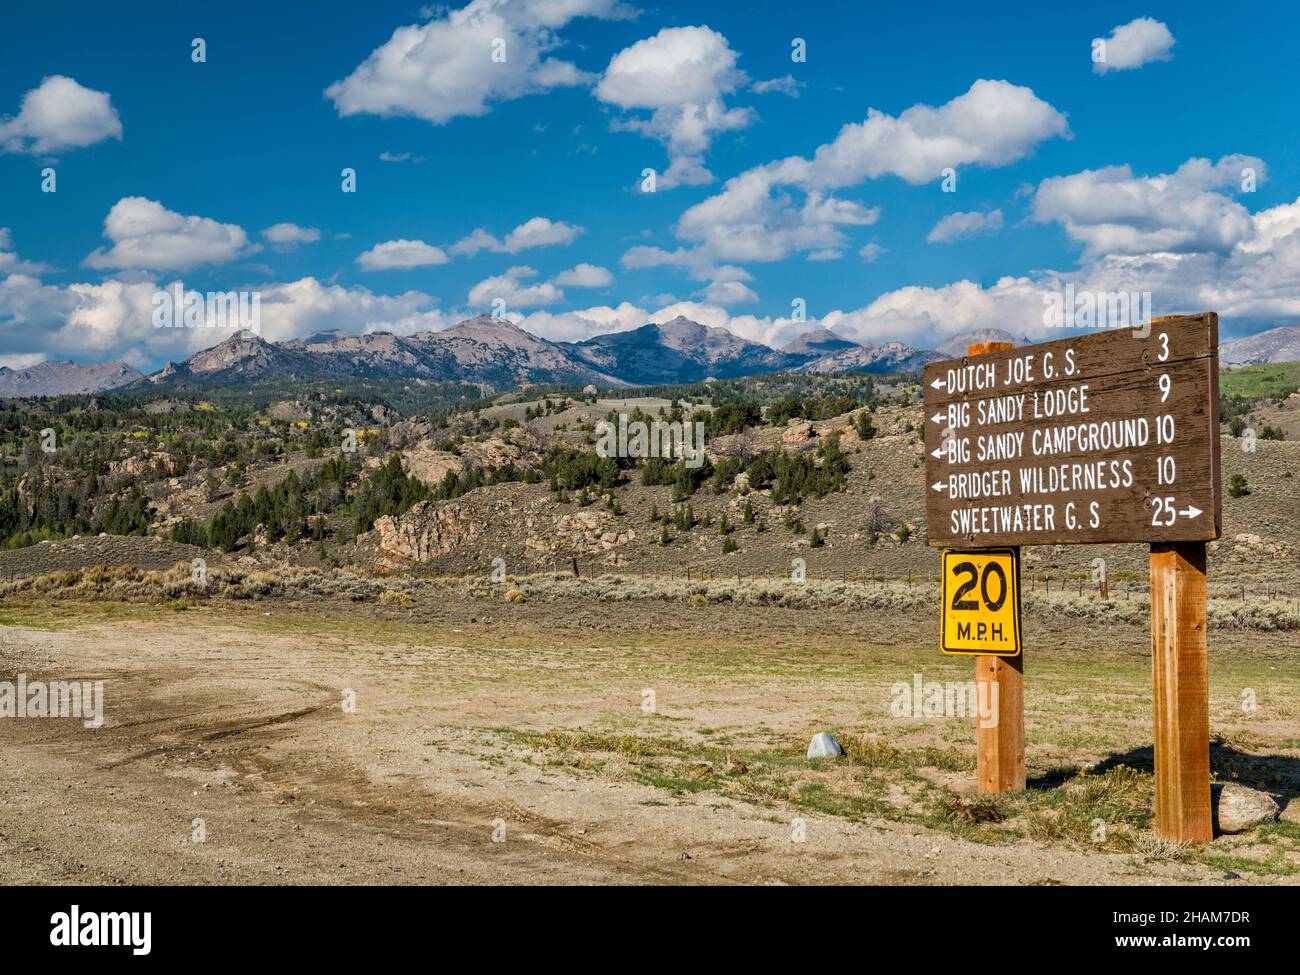 Direction sign, Big Sandy Opening Road (BLMR 4113), at Lander Cutoff Road (CR 132), Wind River Range in distance, Wyoming, USA Stock Photo